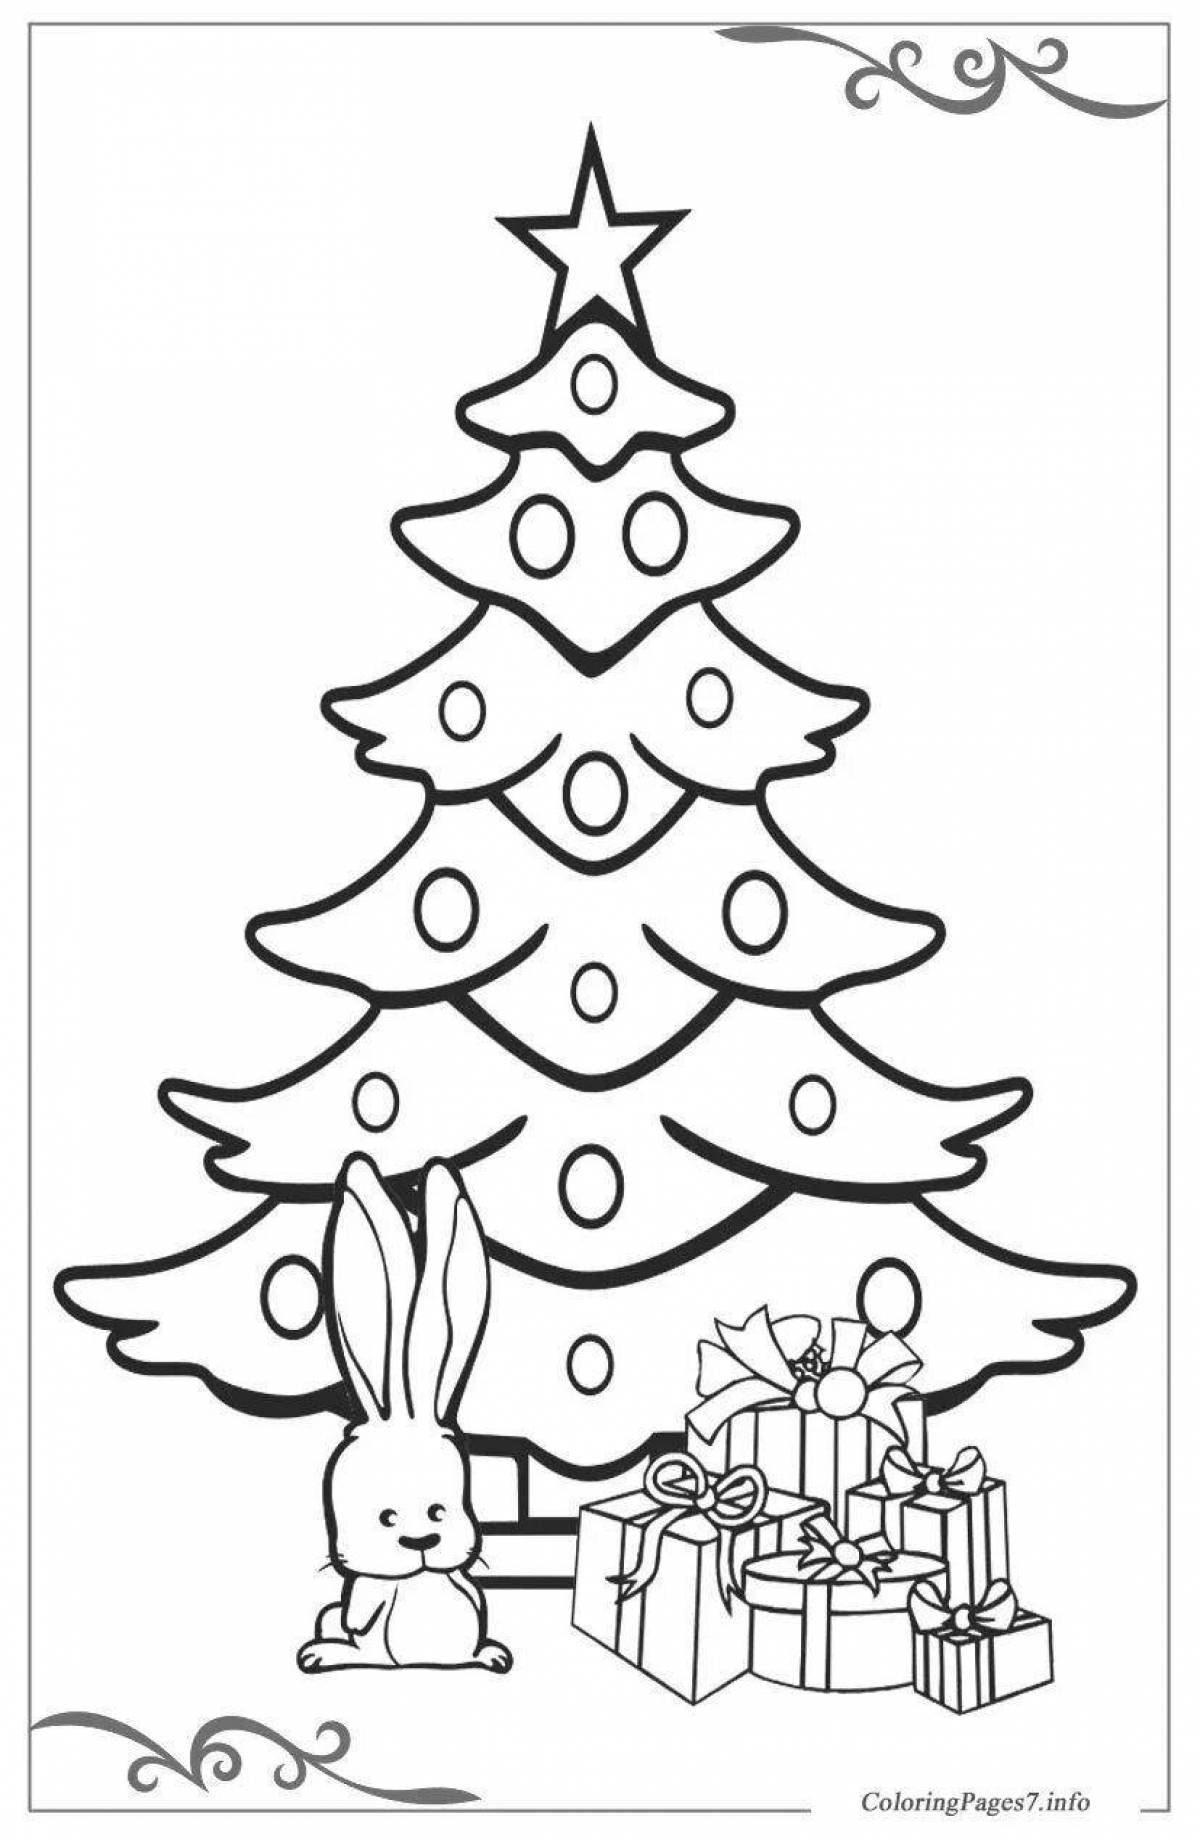 Coloring tree for girls